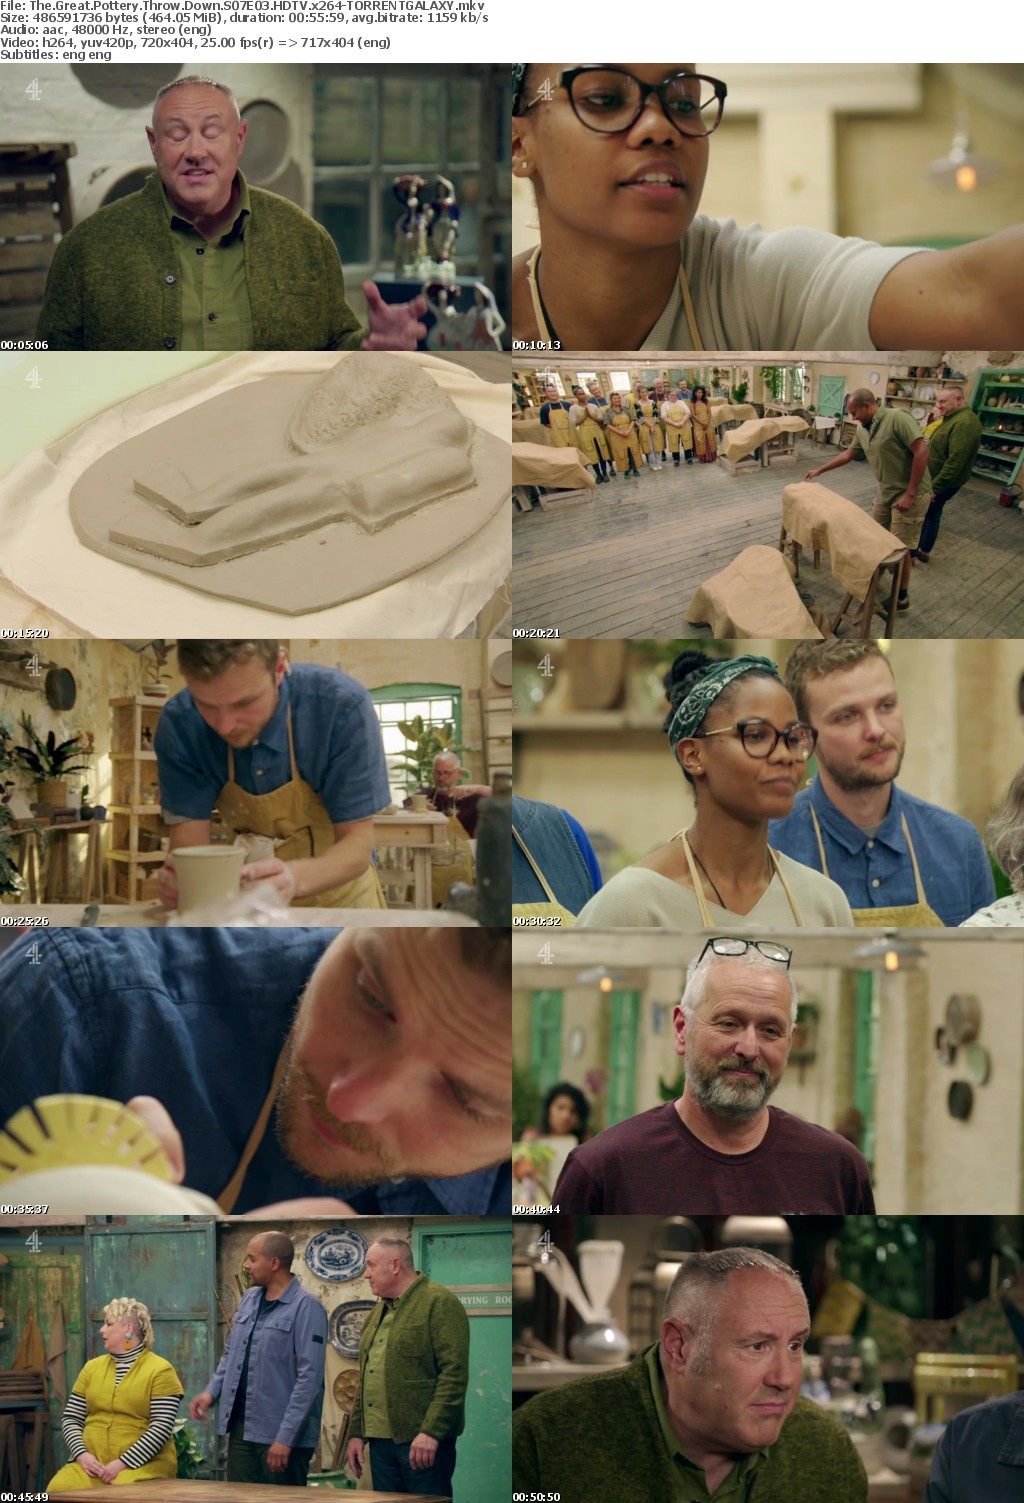 The Great Pottery Throw Down S07E03 HDTV x264-GALAXY